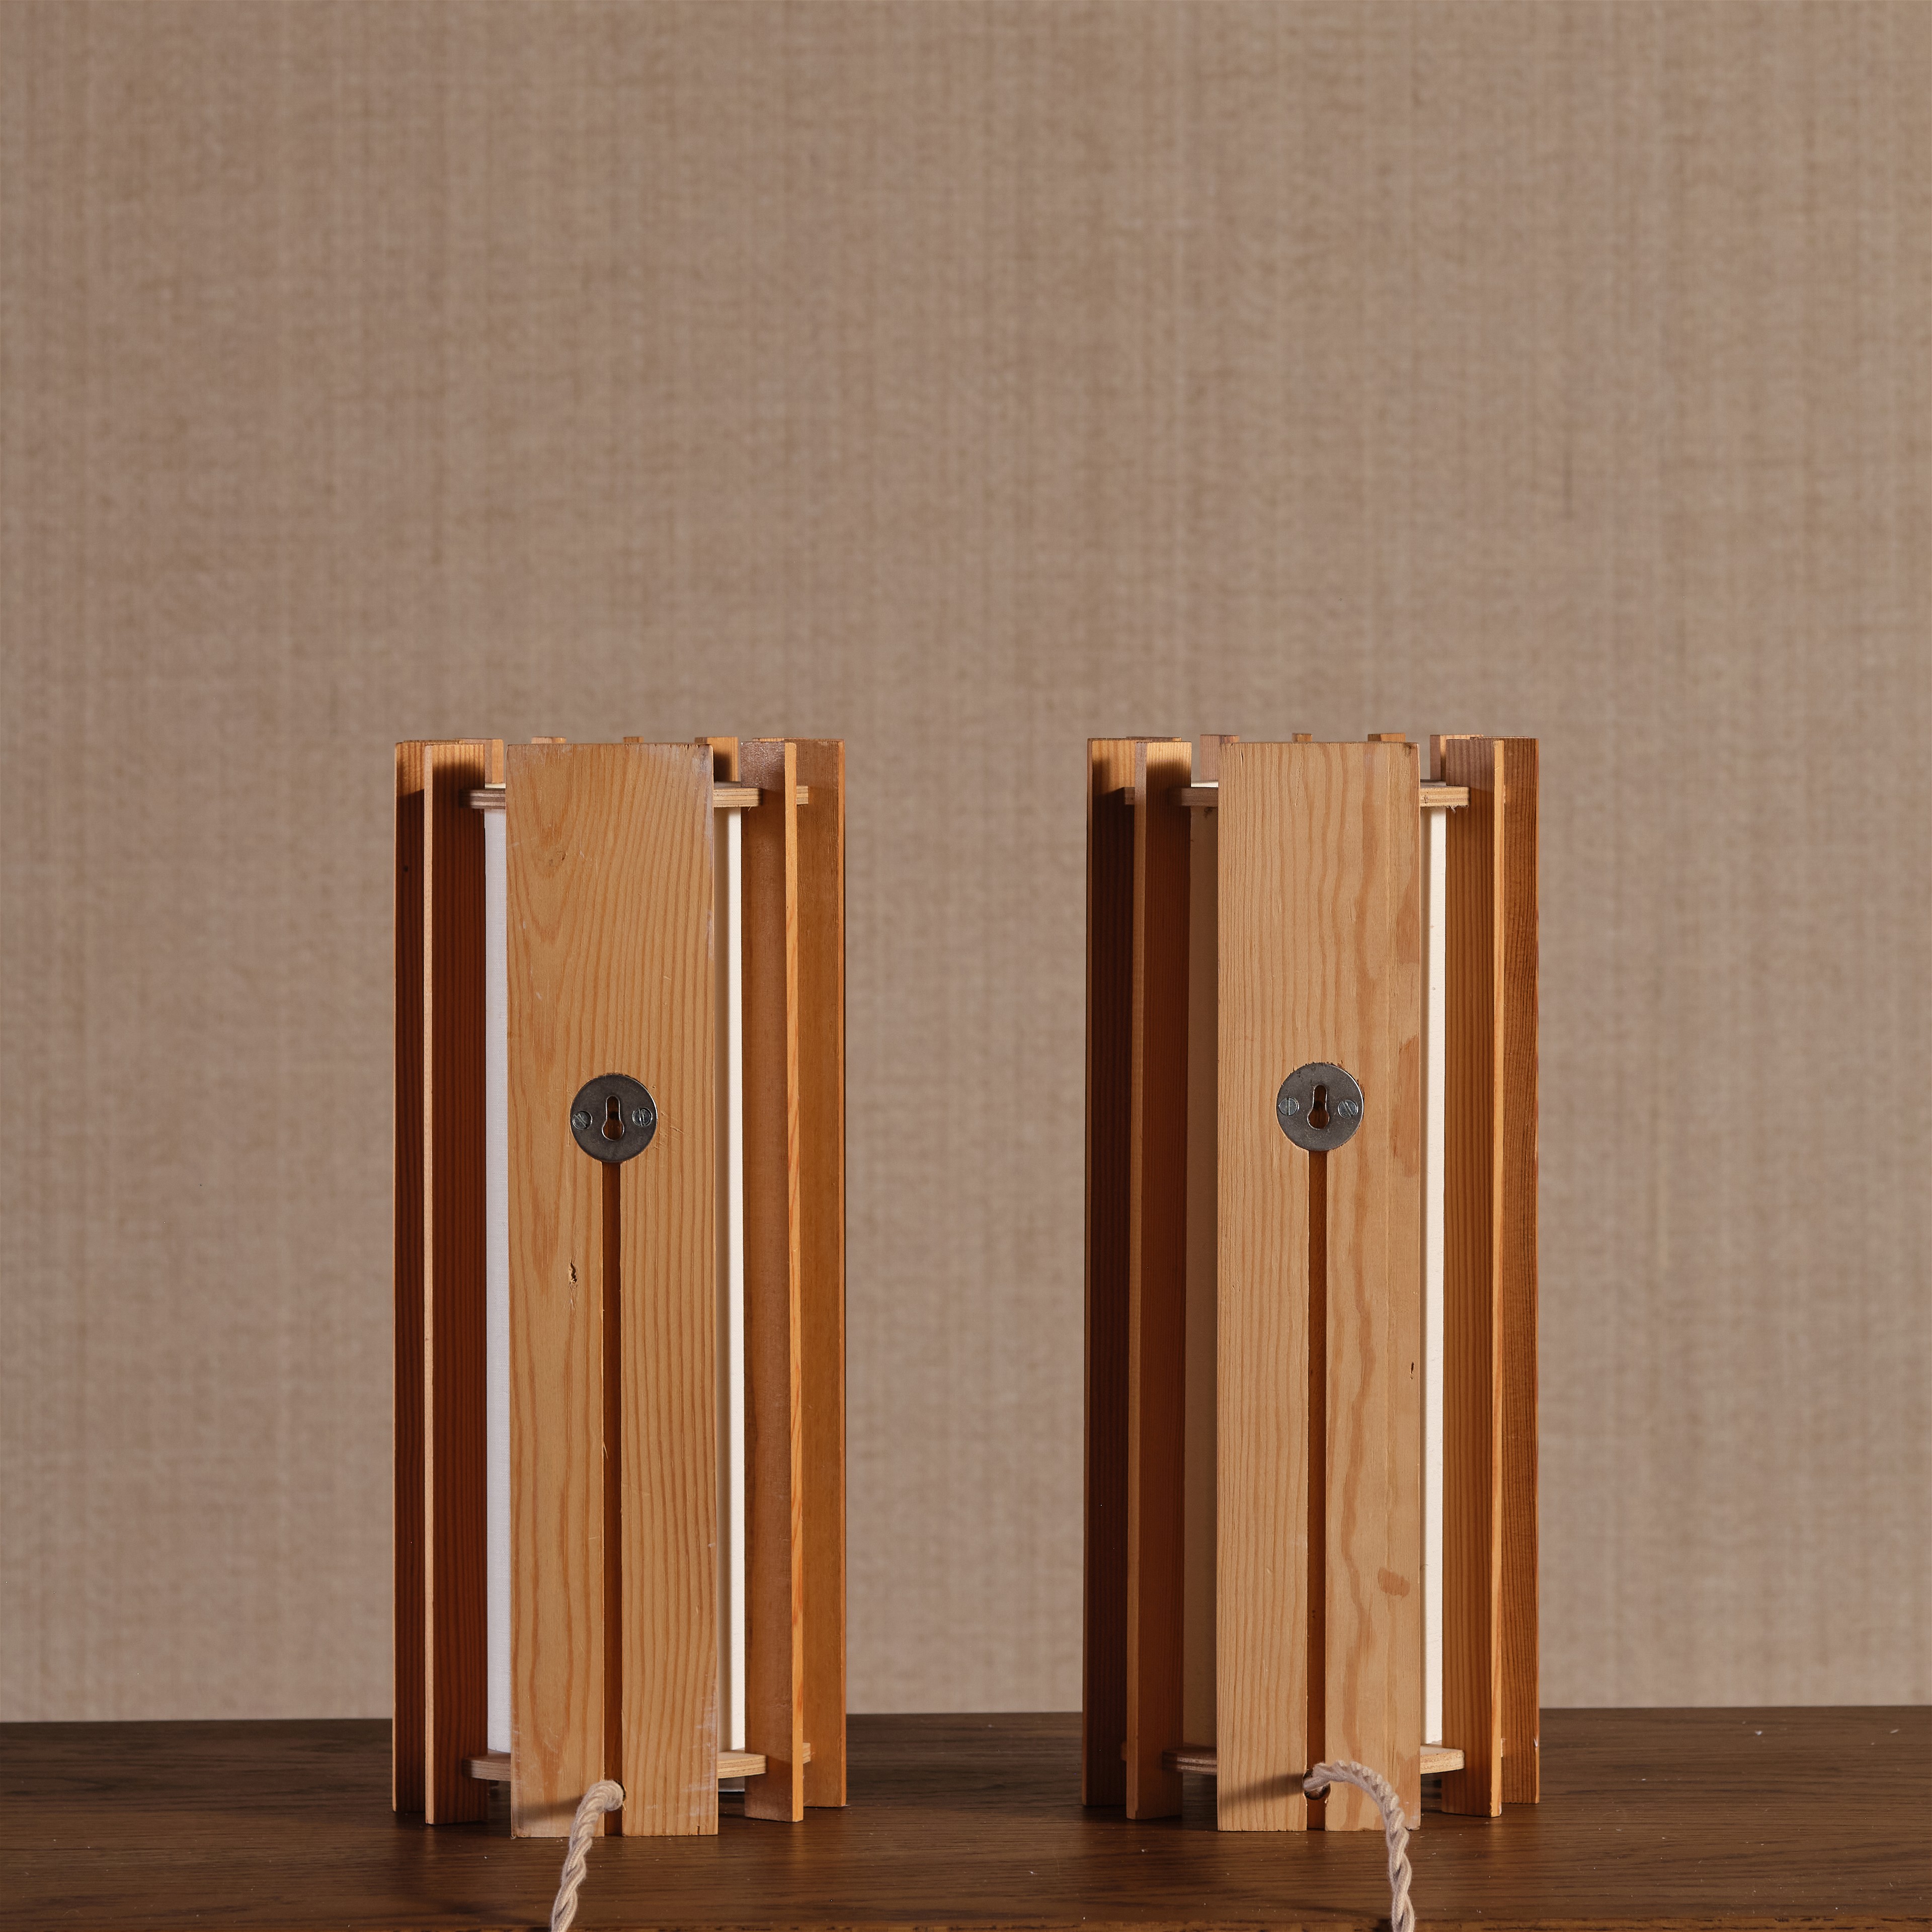 a couple of wooden speakers sitting on top of a wooden table